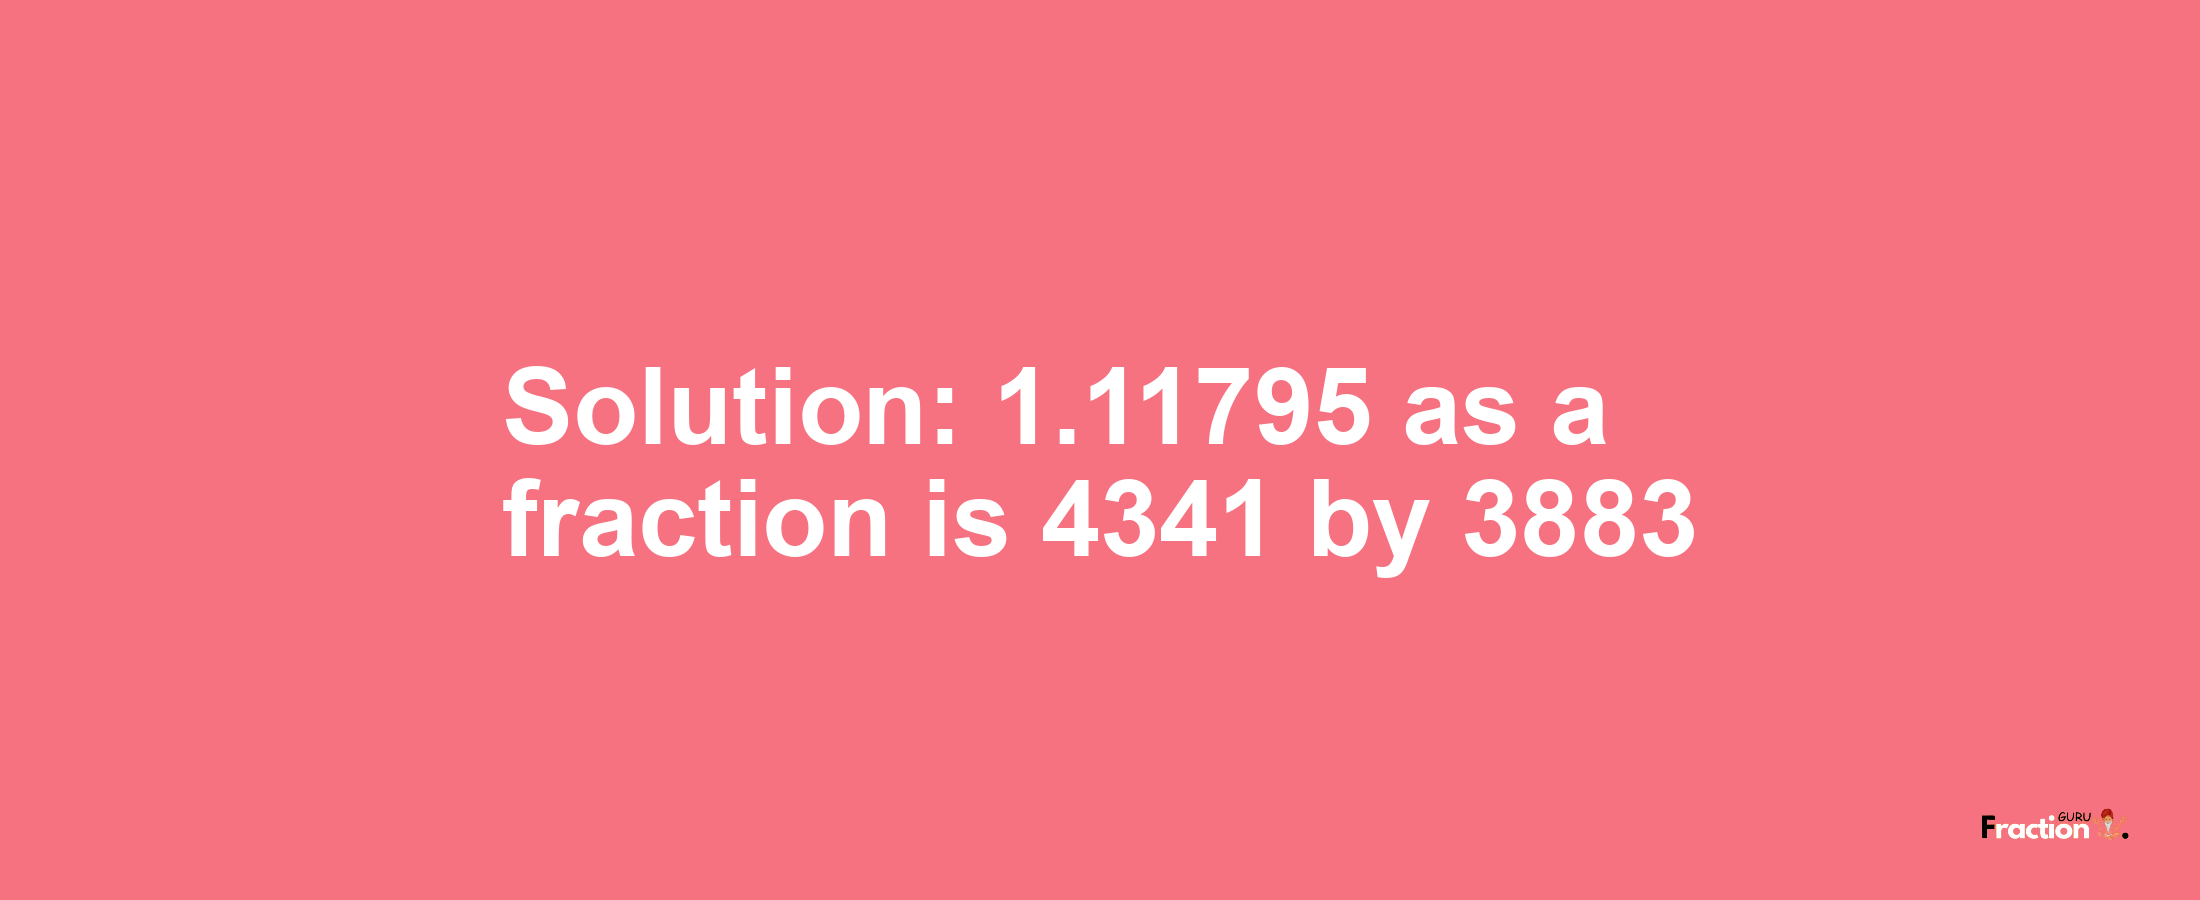 Solution:1.11795 as a fraction is 4341/3883